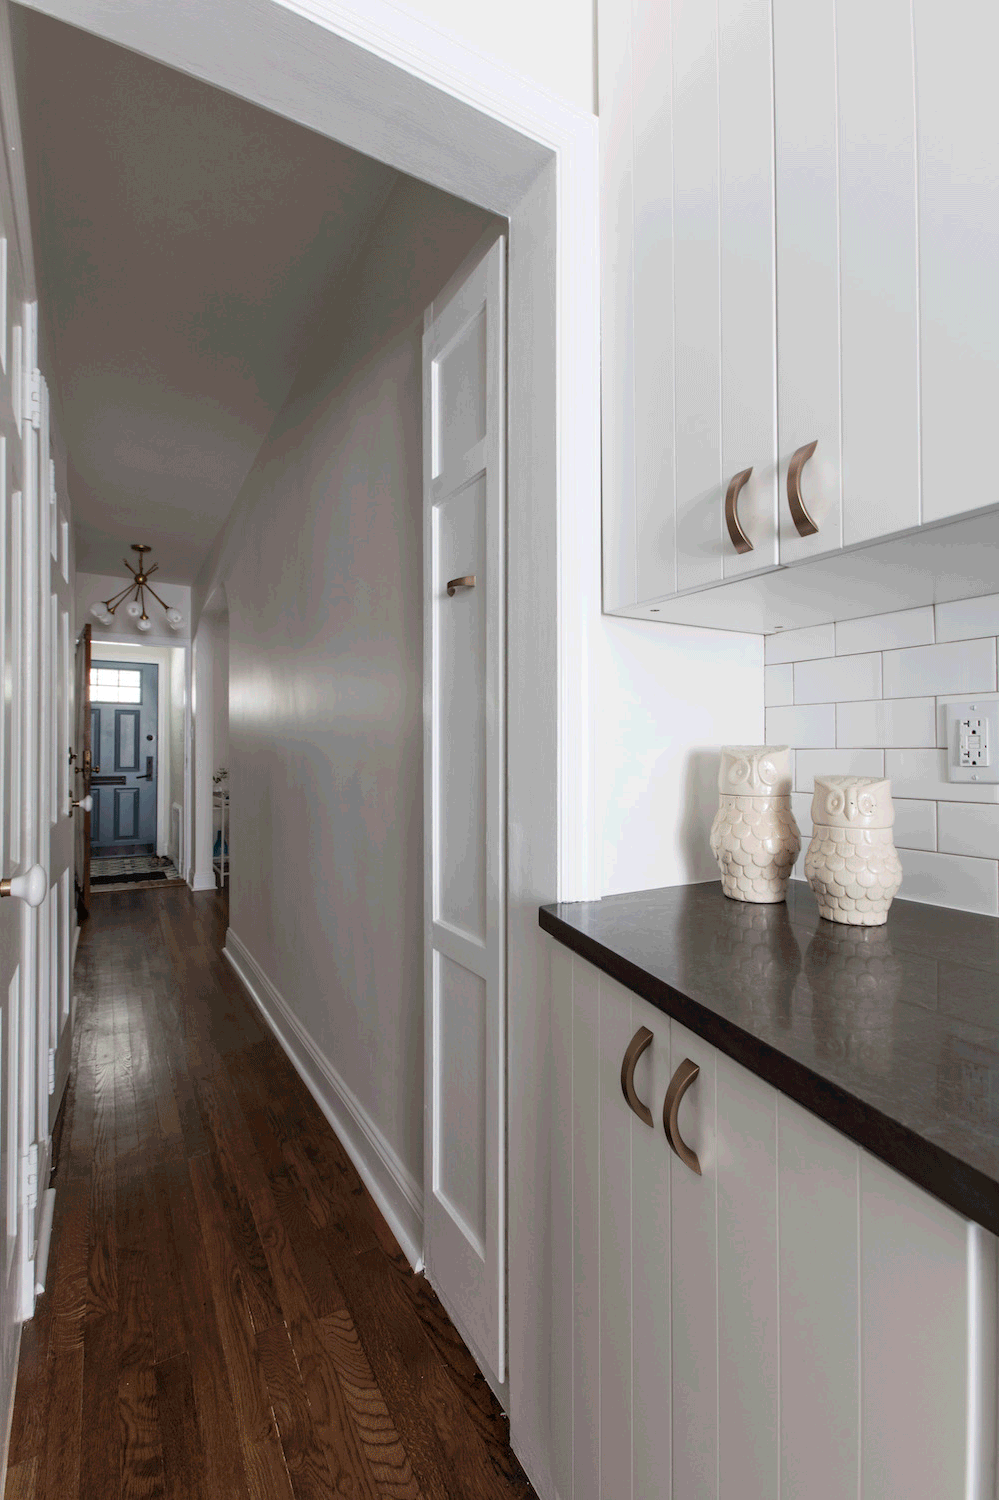 Image of hidden pull-out pantry in renovated kitchen